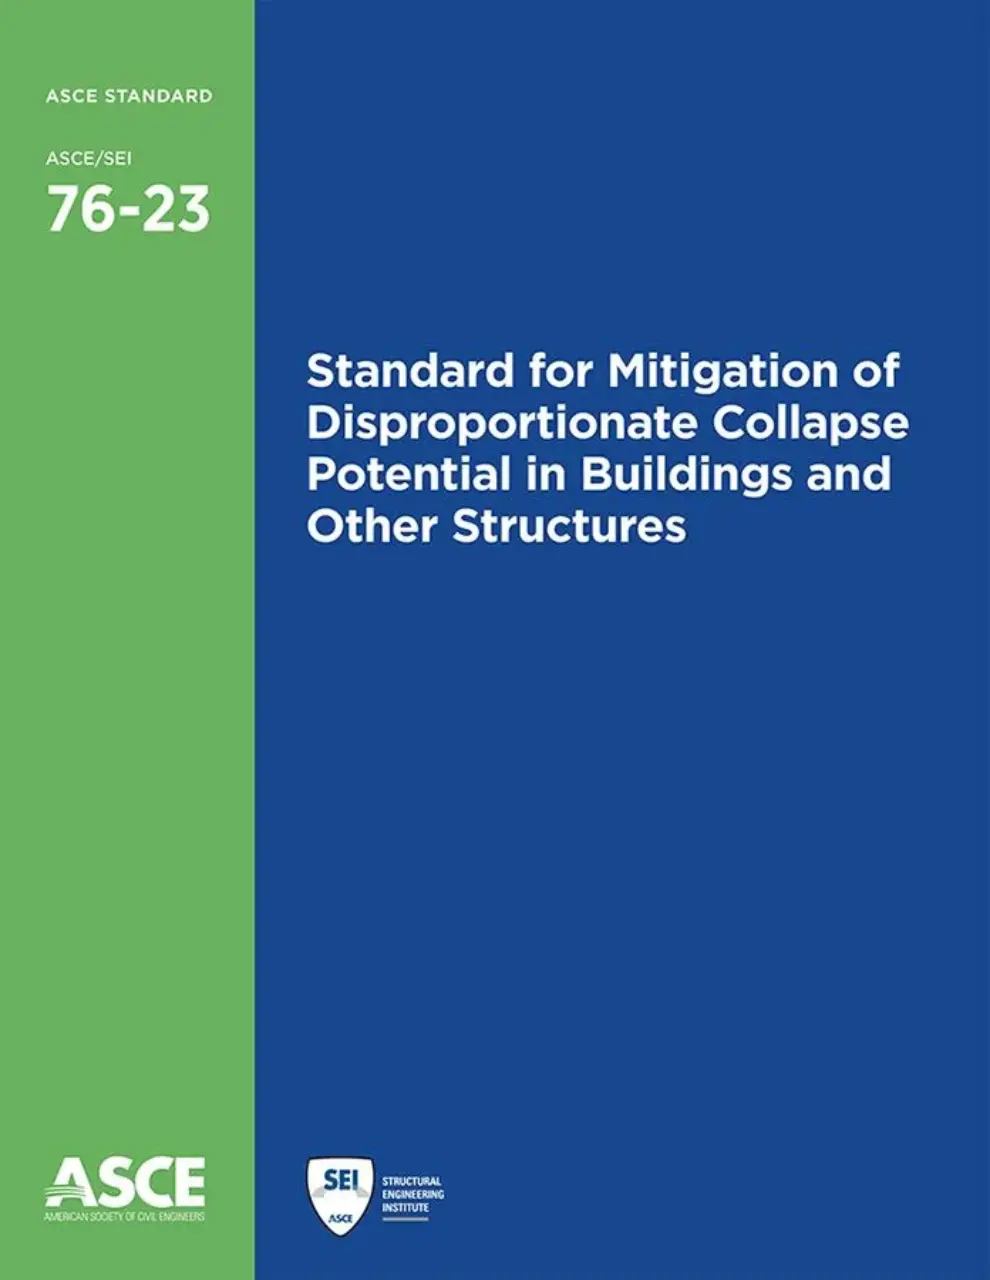 <strong>Mitigating Disproportionate Collapse Using New ASCE Standard 76</strong><strong></strong>